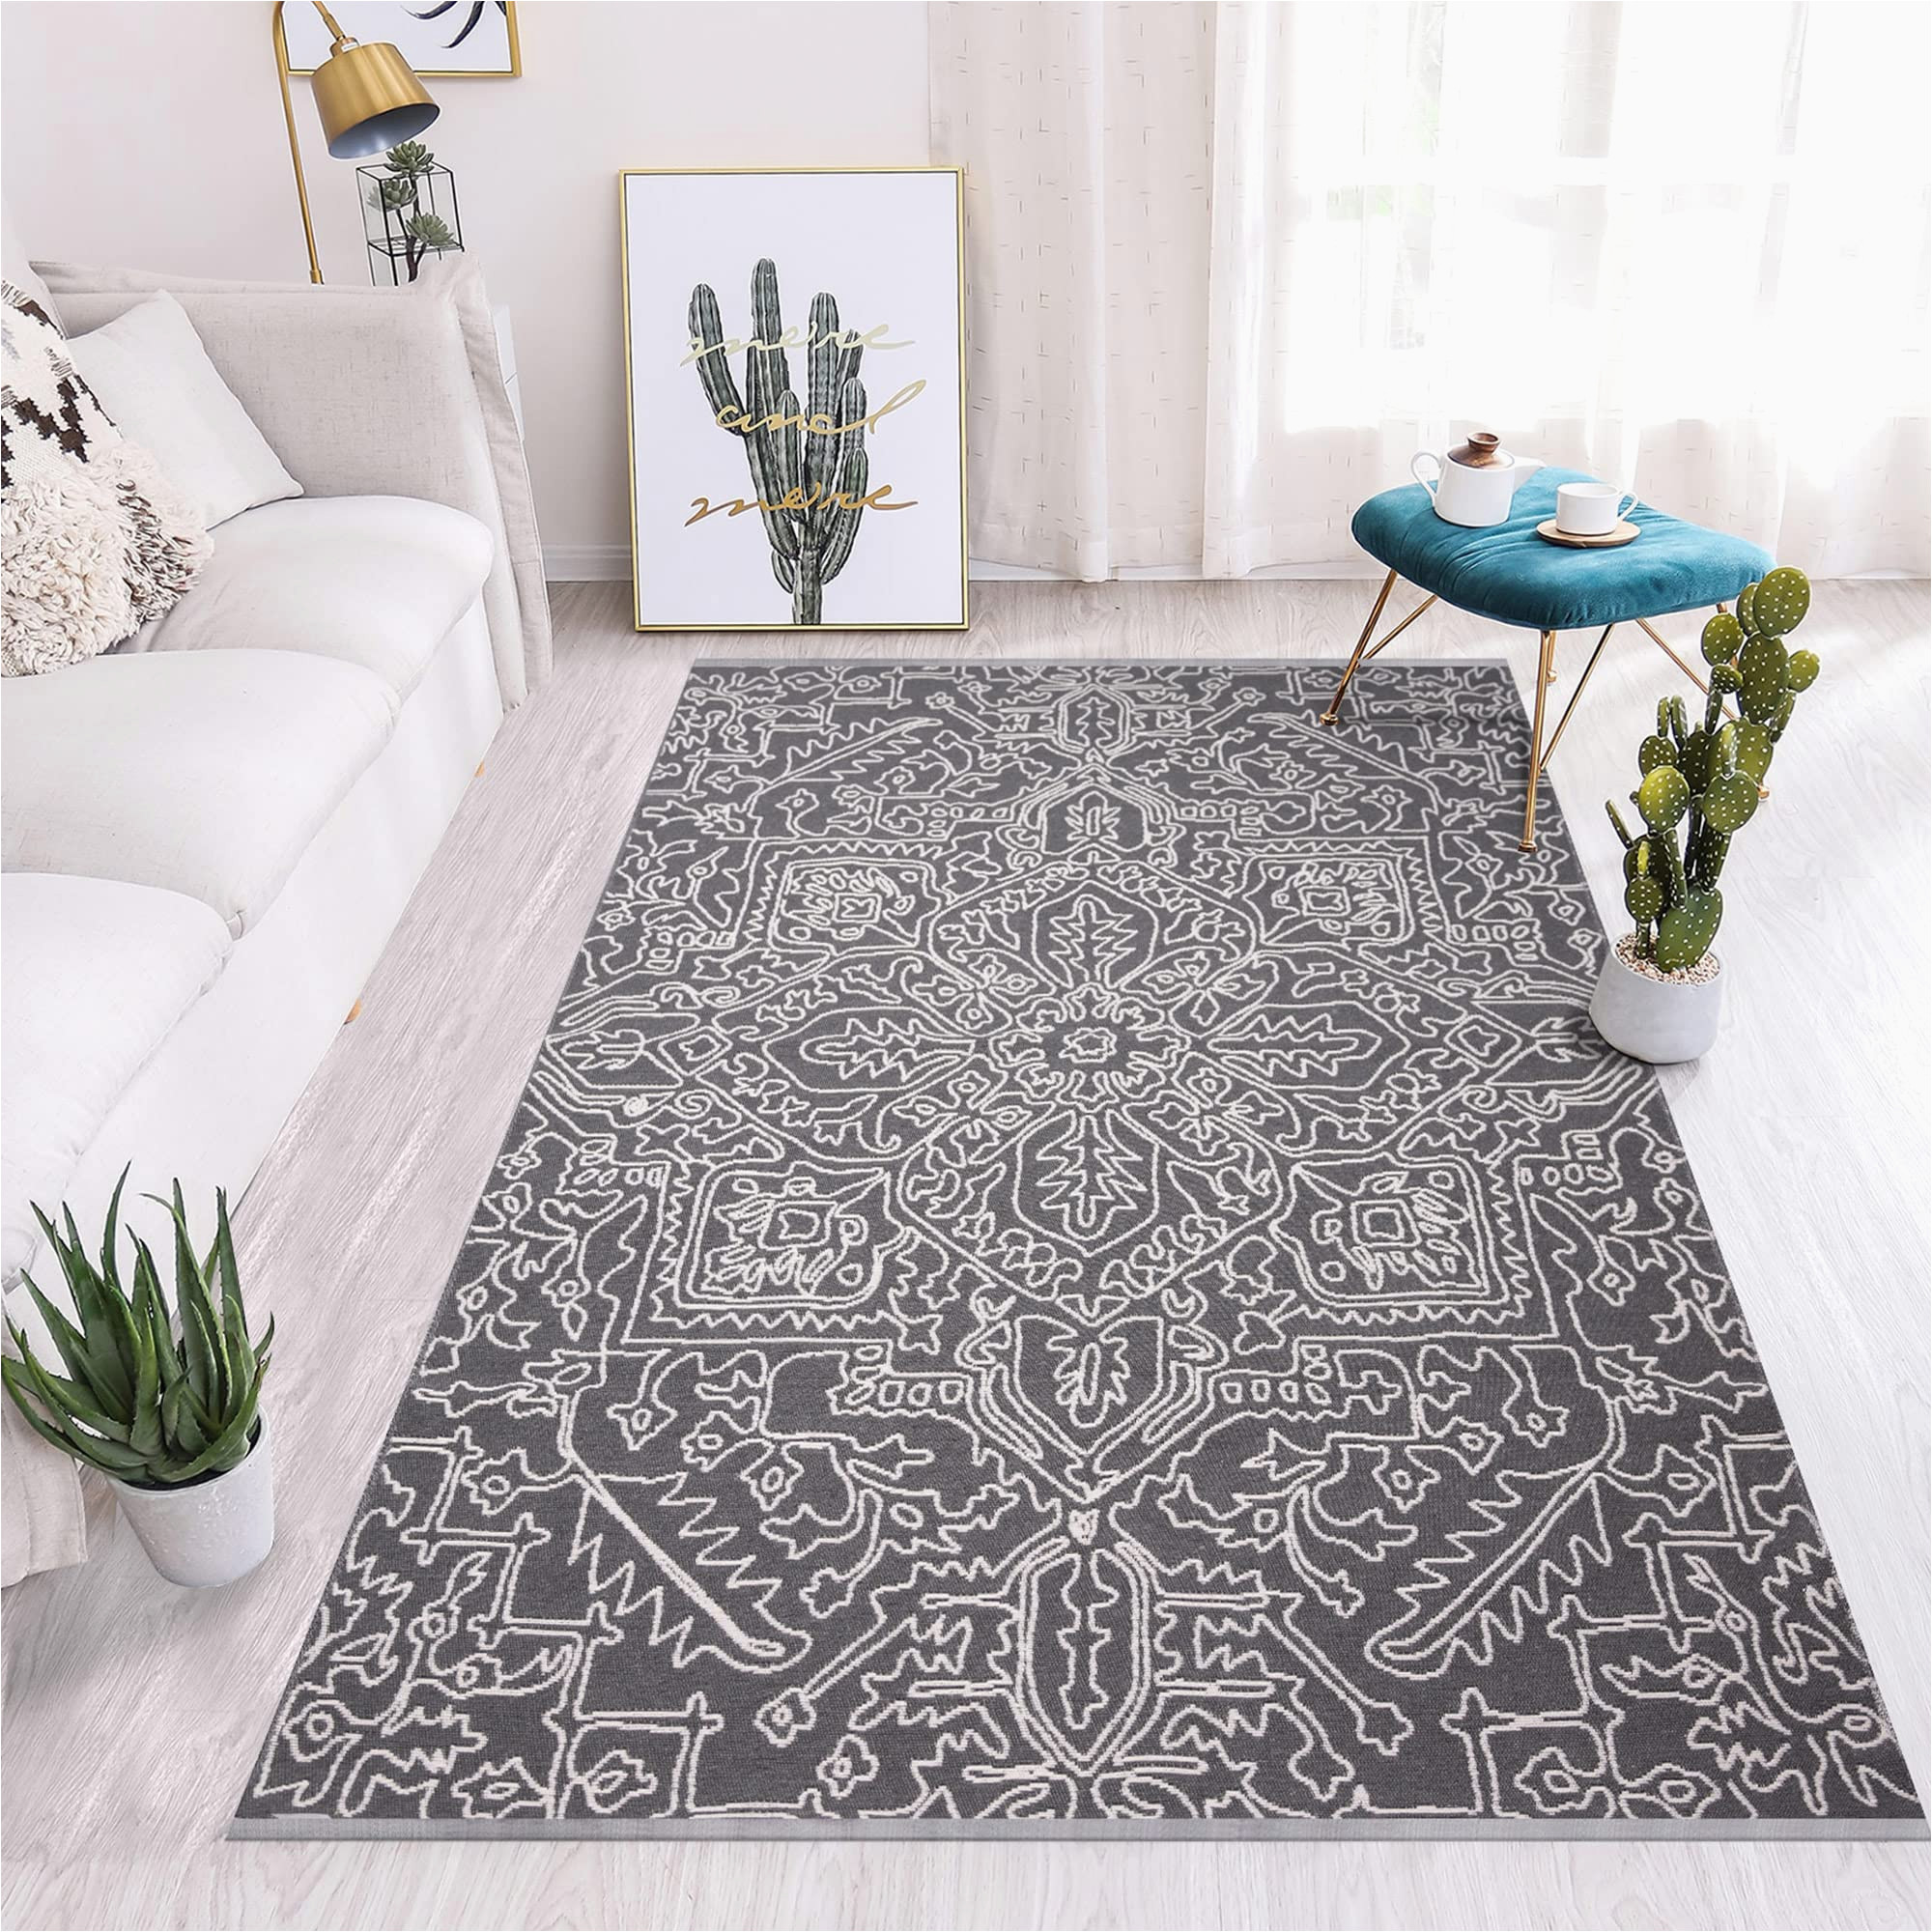 Washable Living Room area Rugs Linromia Boho Decor area Rug – 3’x5′ Machine Washable Grey Rug Woven Double Sided Accent Rug Entry Throw Carpet for Living Room Bedroom Bathroom …